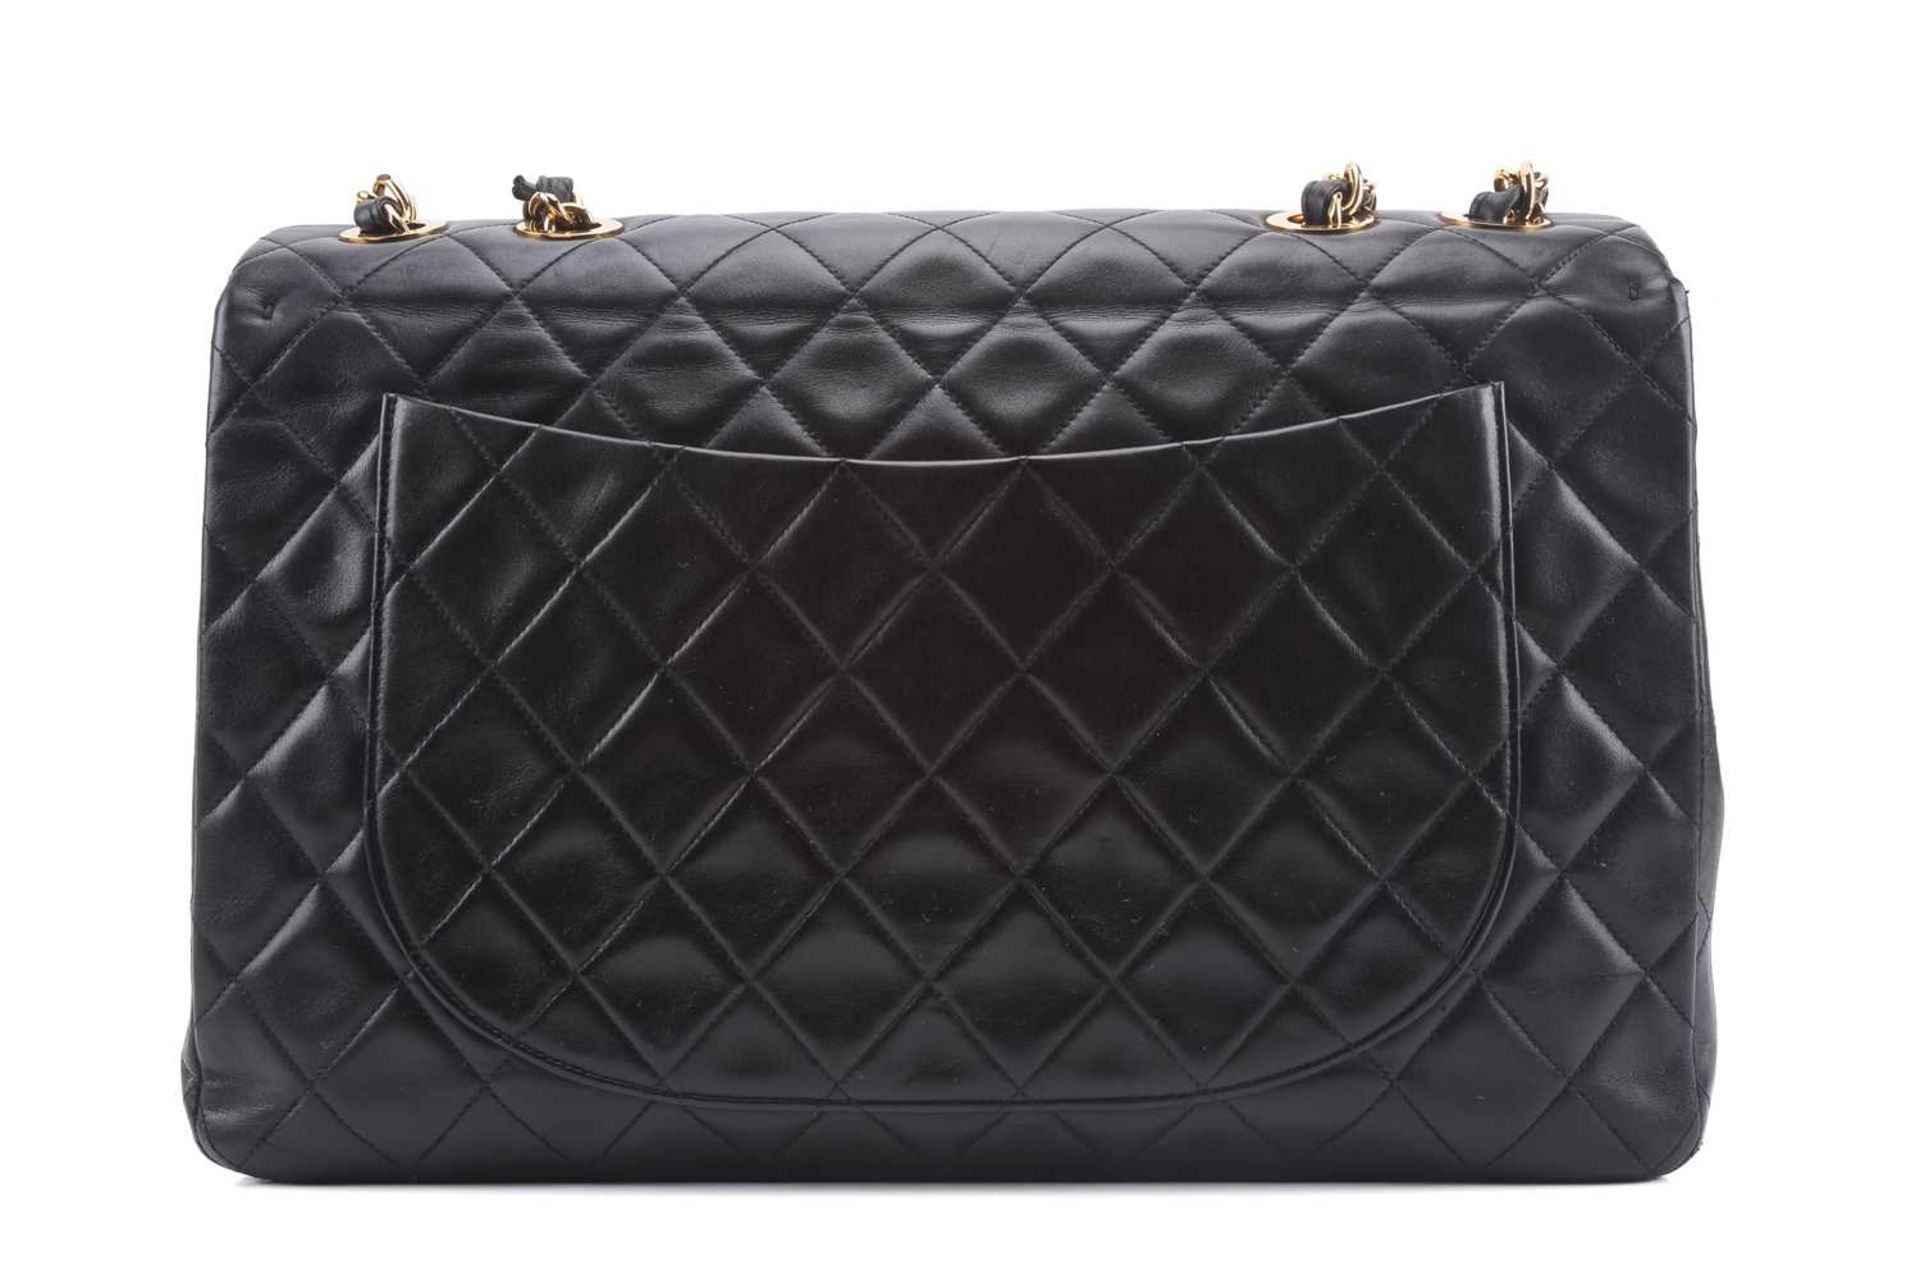 Chanel - a jumbo XL single flap bag in black diamond-quilted lambskin leather, circa 1991, - Image 4 of 15